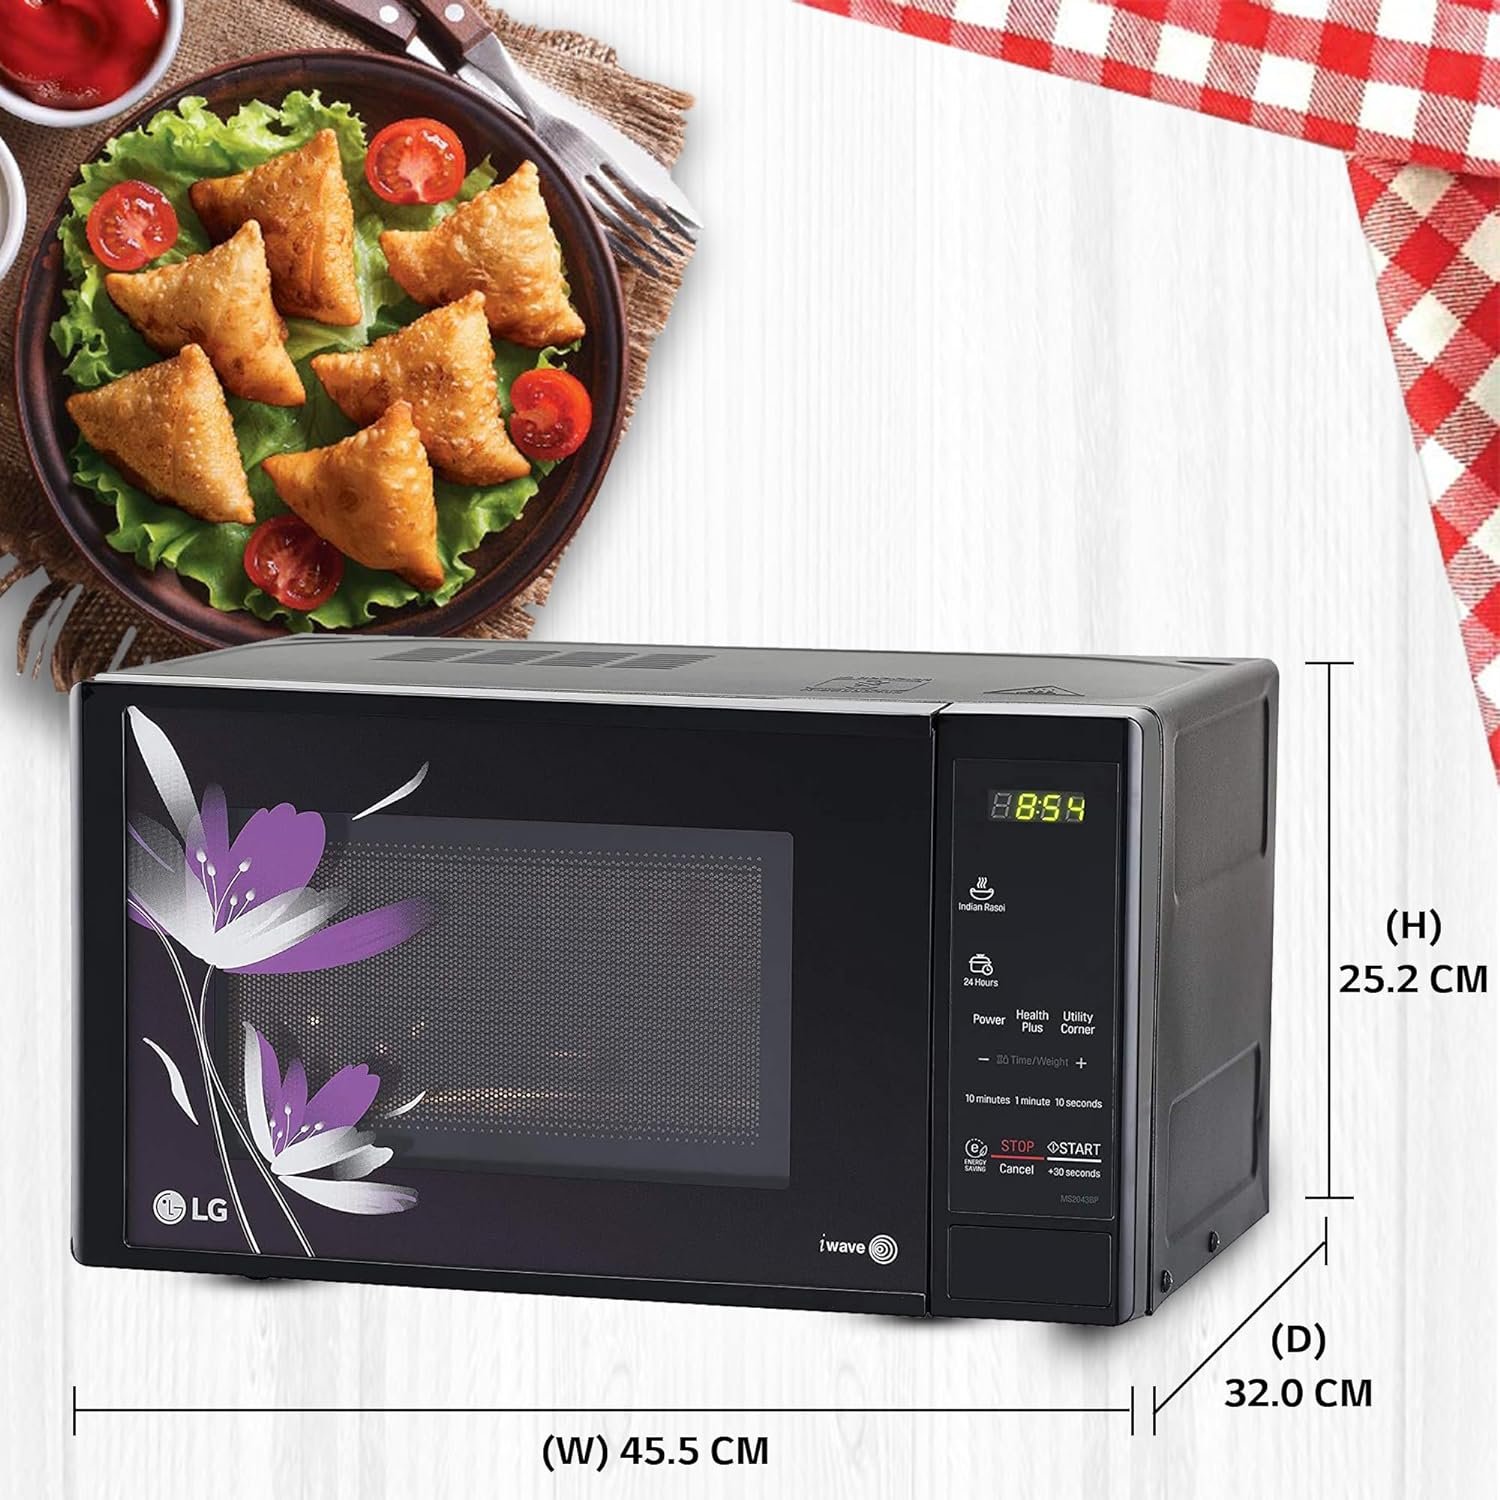 002 LG 20 L Solo Microwave Oven 05